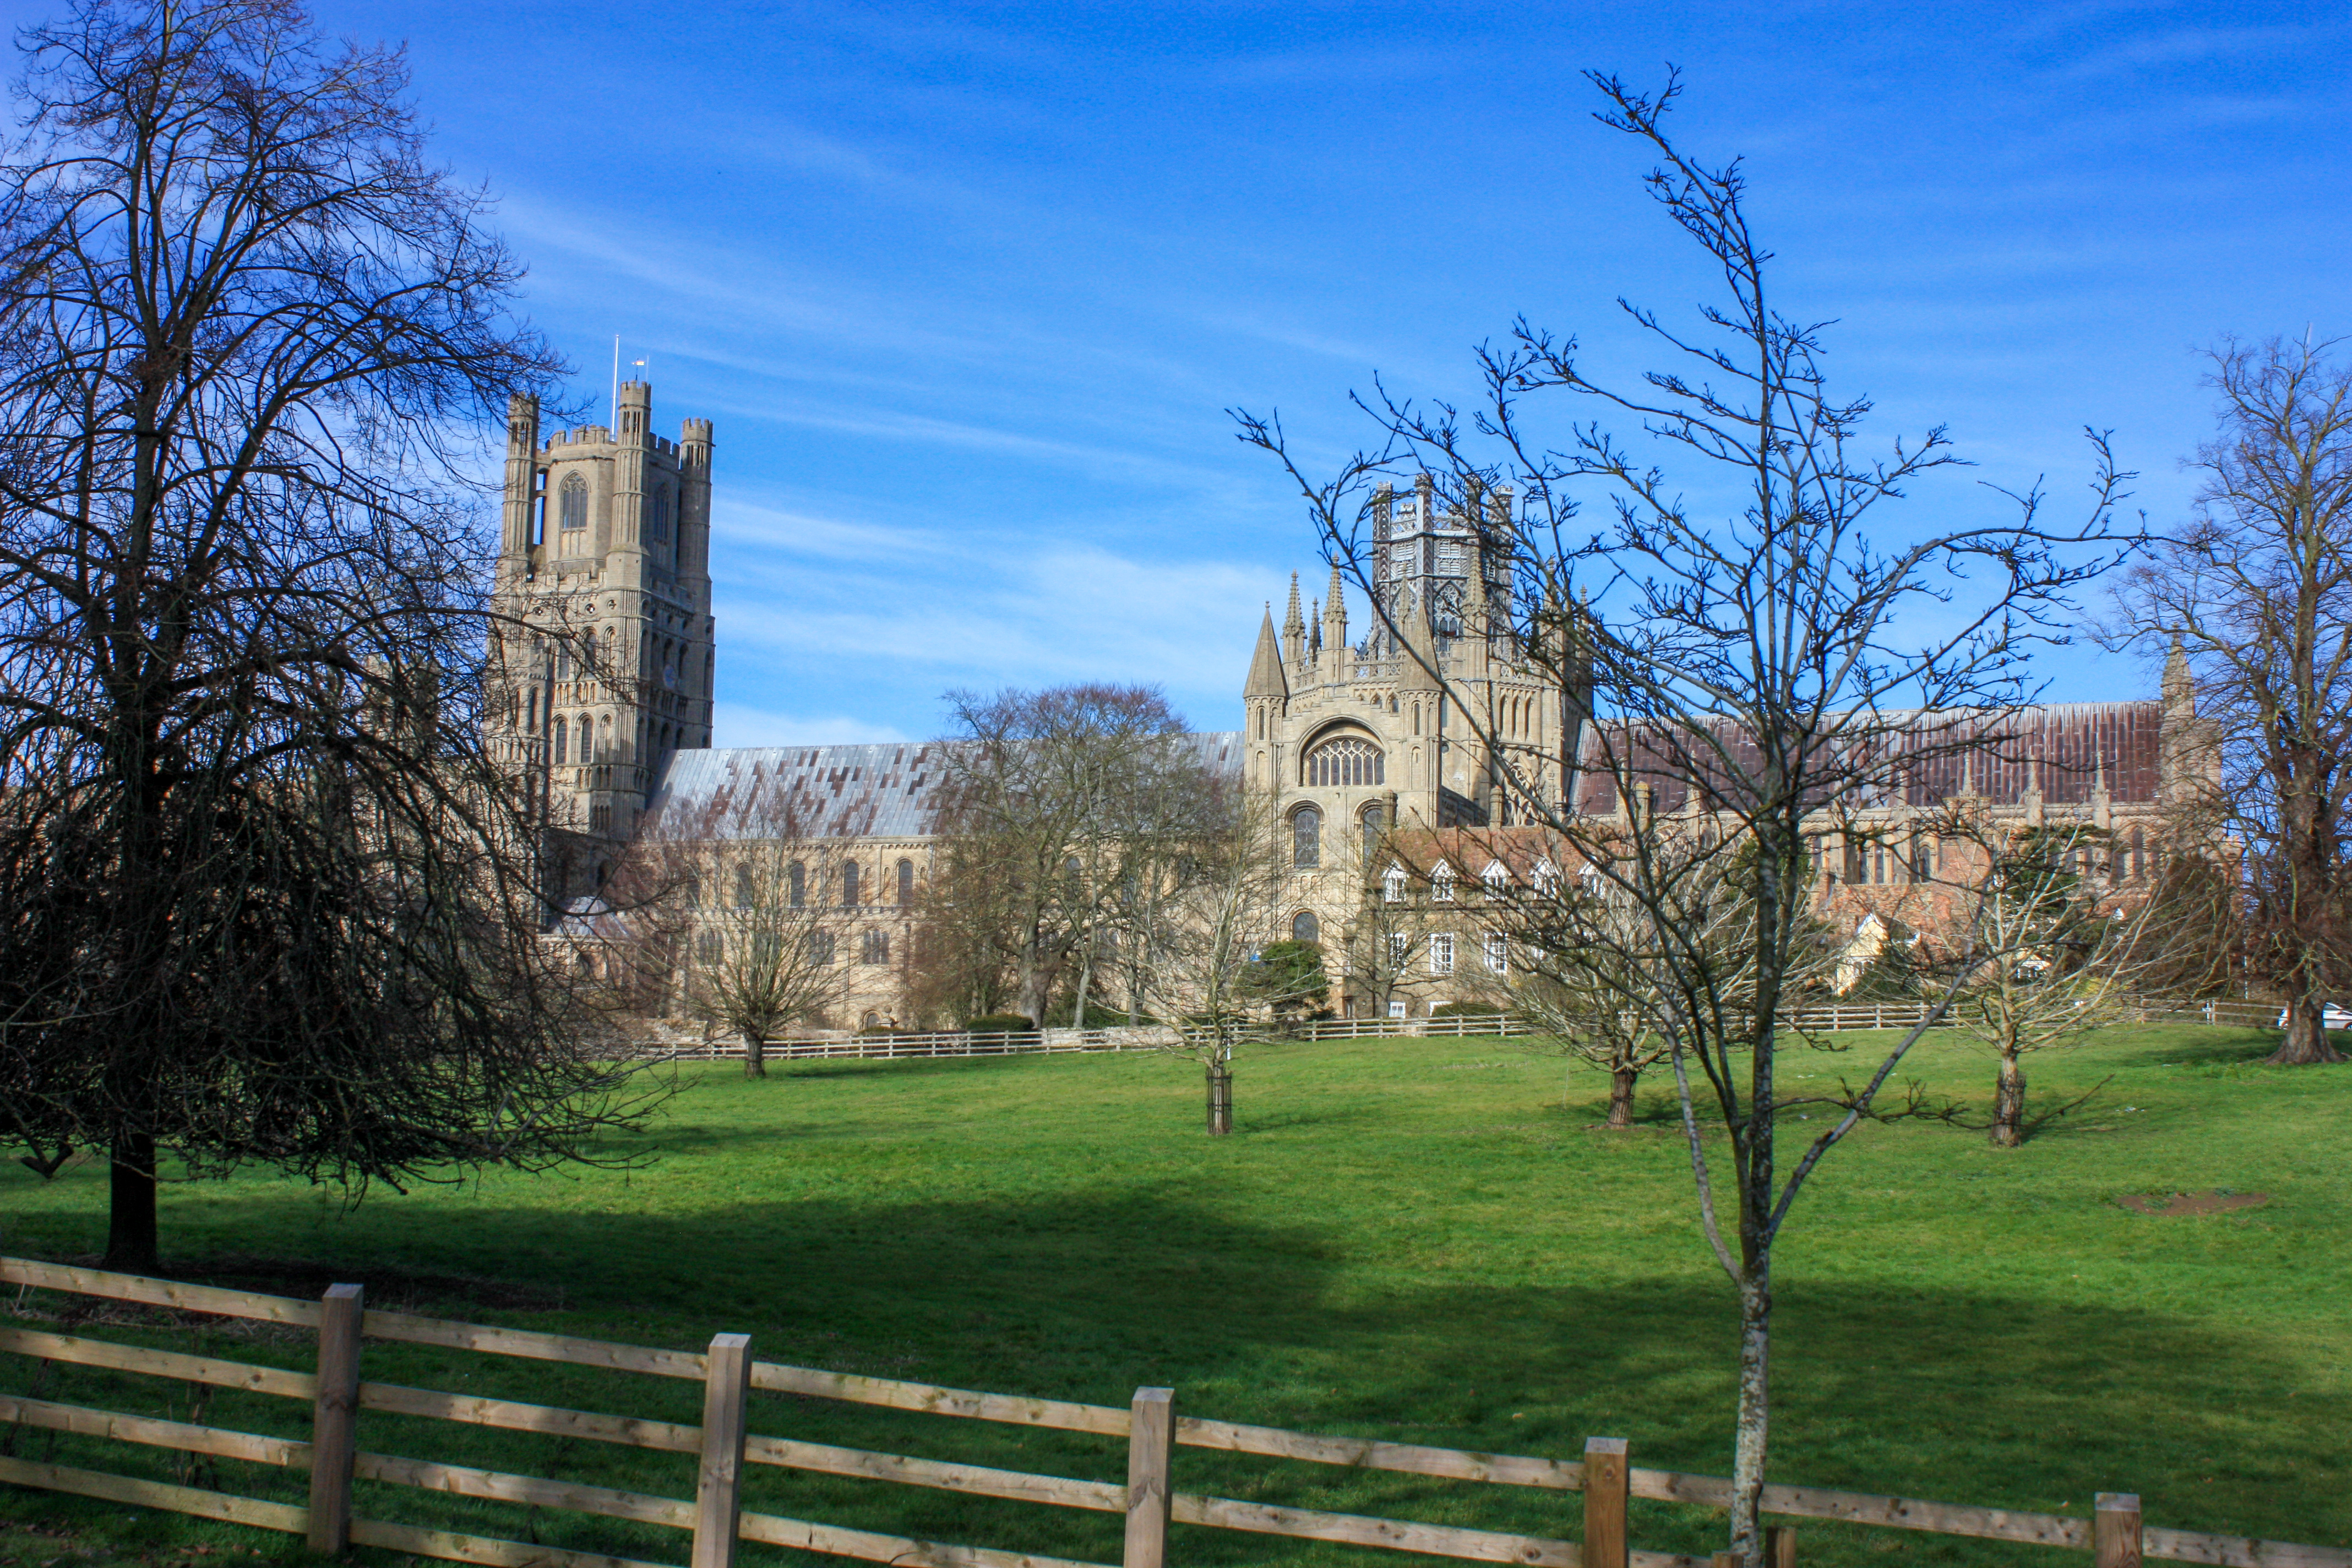 Photo of Ely Cathedral, taken across parkland.